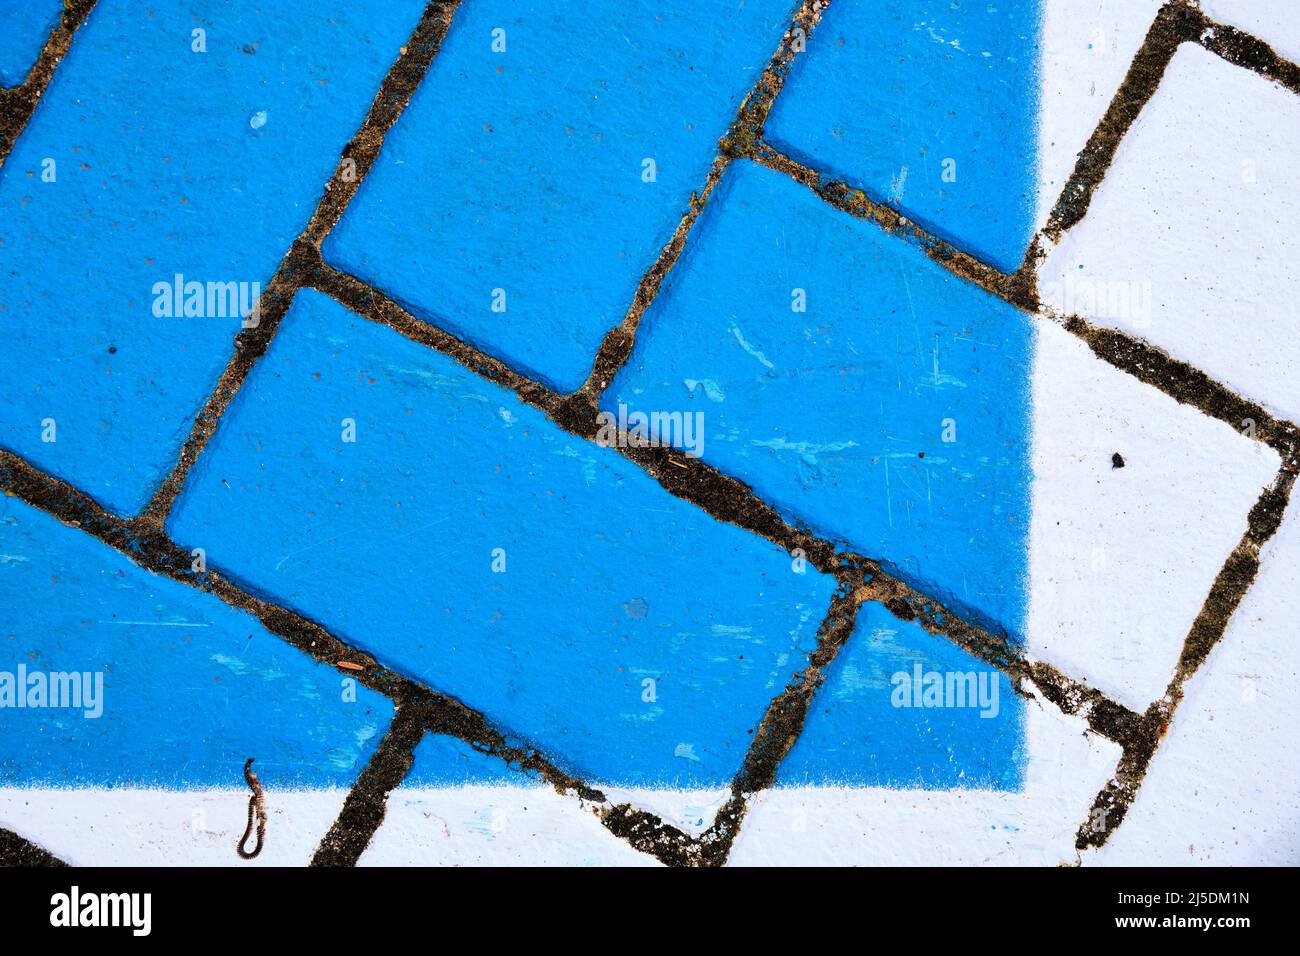 Bricks painted blue and white form herringbone pattern.  Bricks are textured and worn in places. Stock Photo